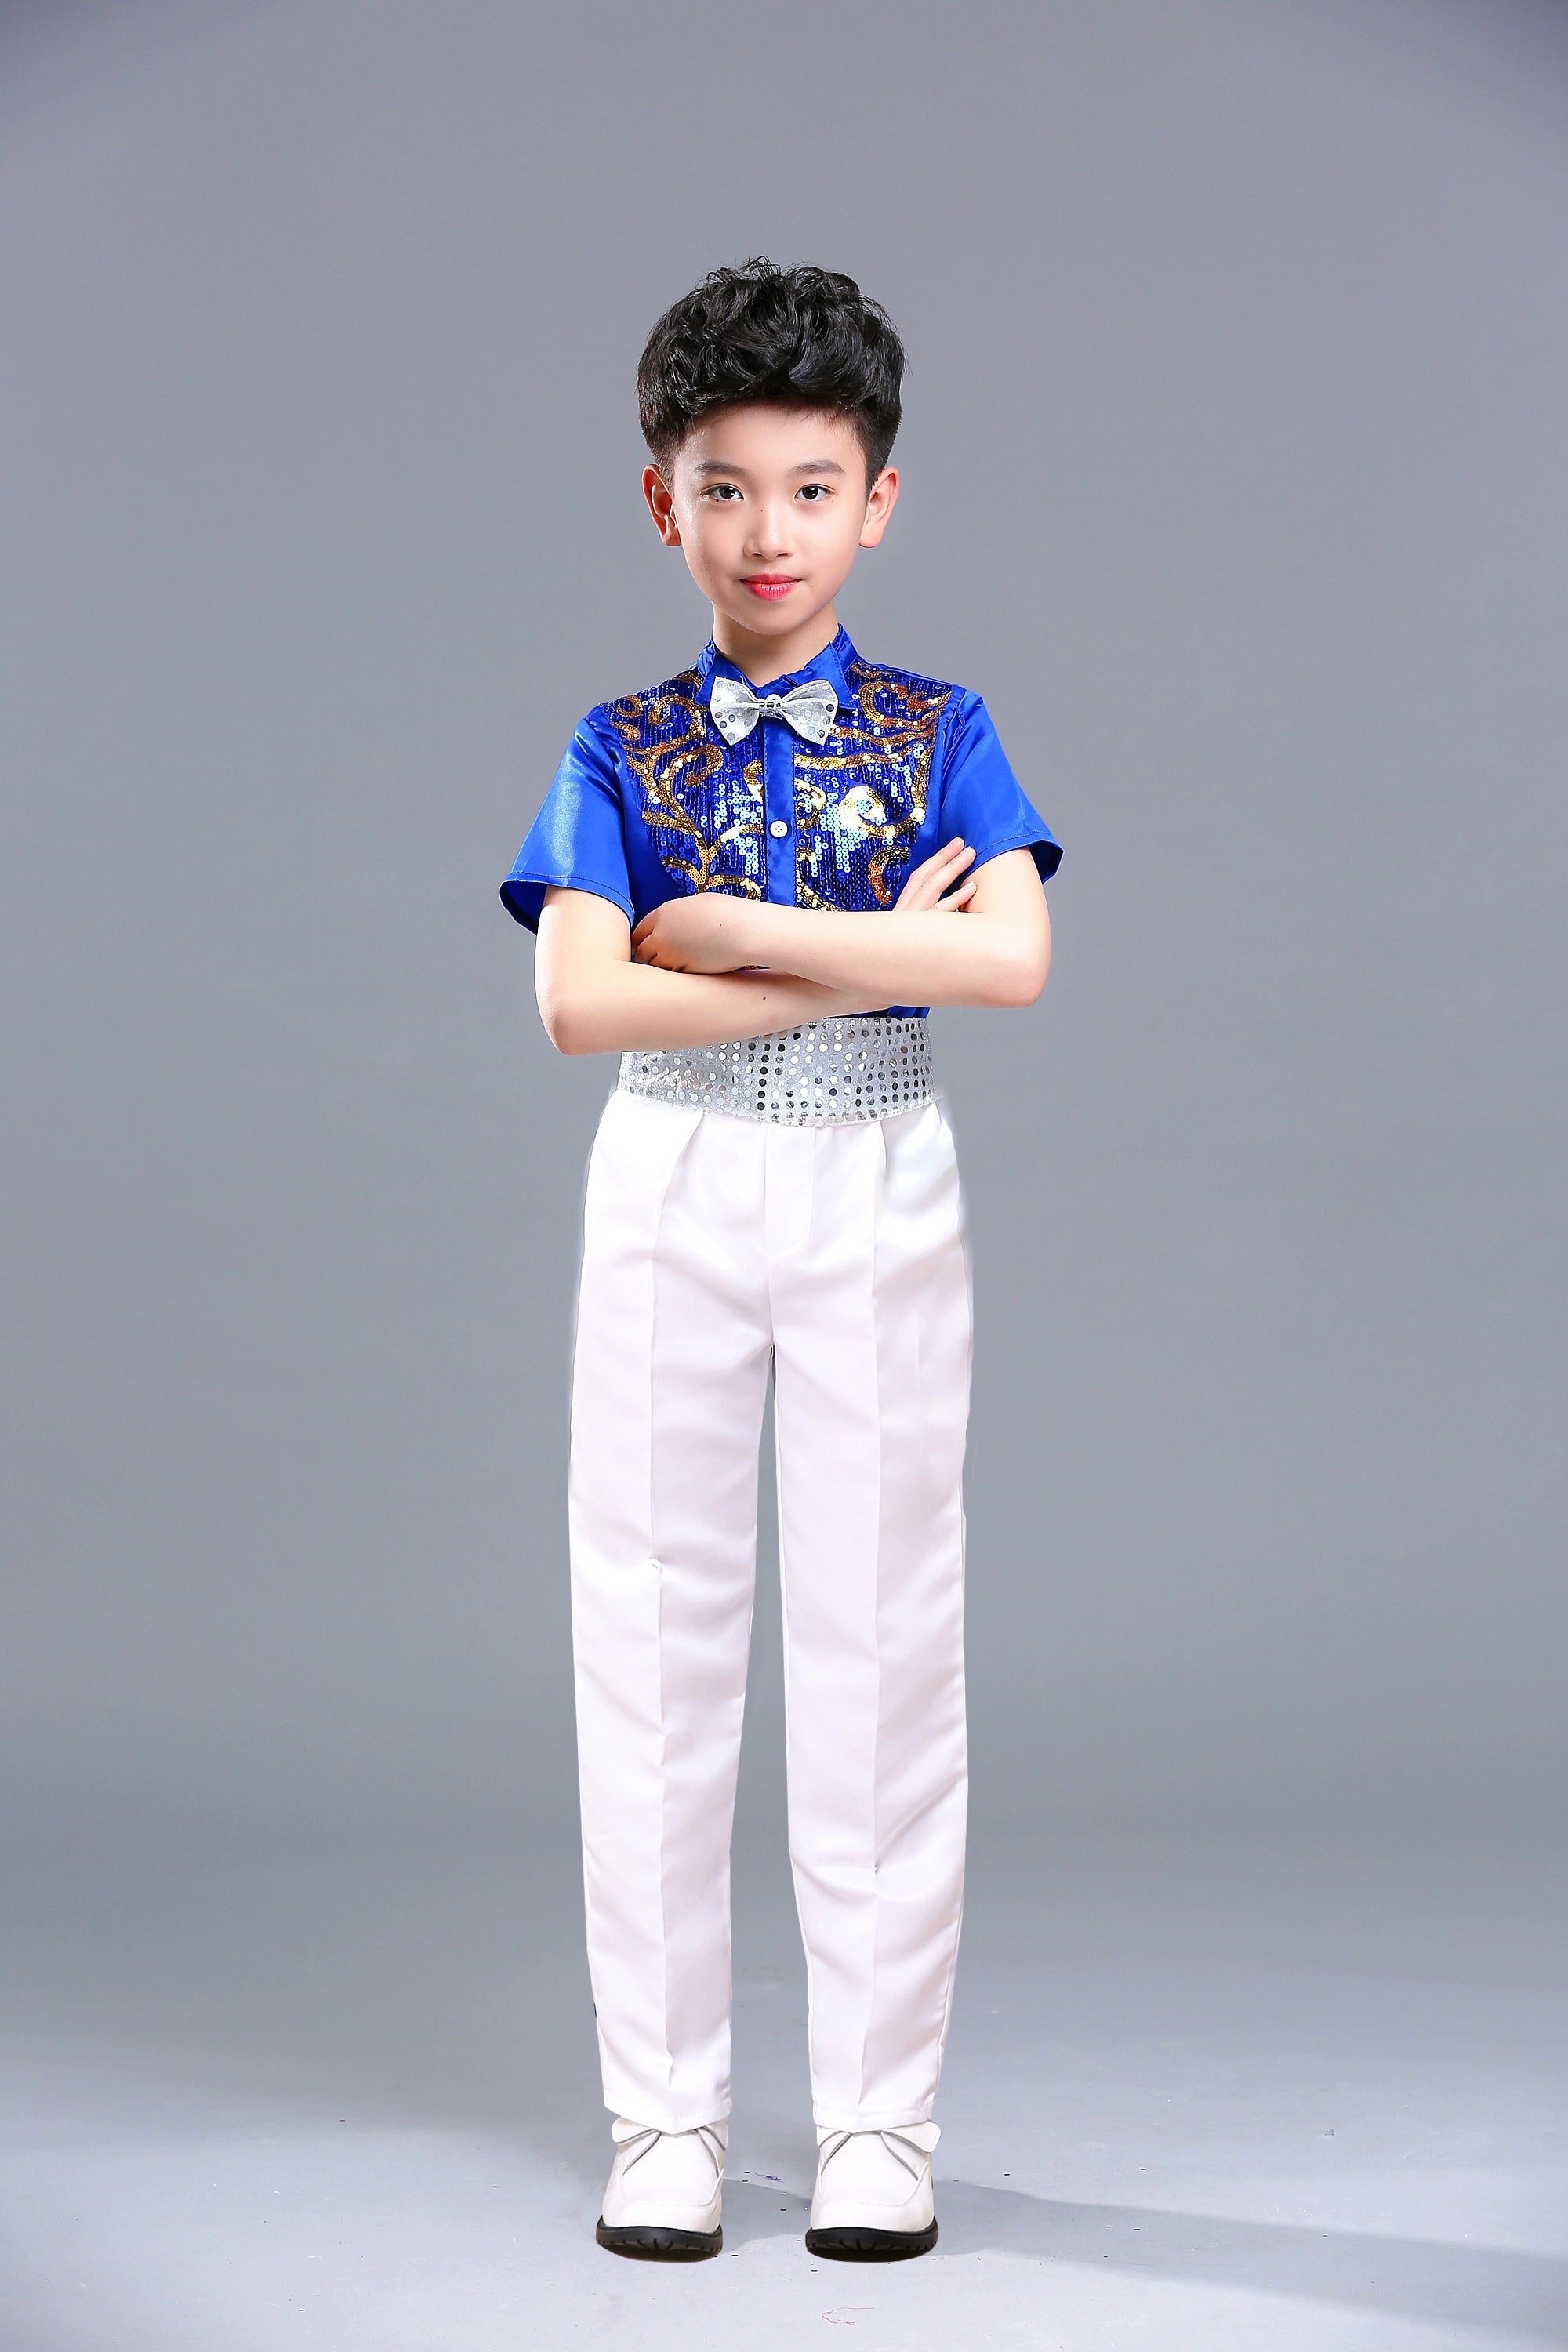 Boys Hip Hop Costume Sequin Shirts White Pants Suit Jazz Costumes Kids Stage Dancing Outfit Children Street Show Wear